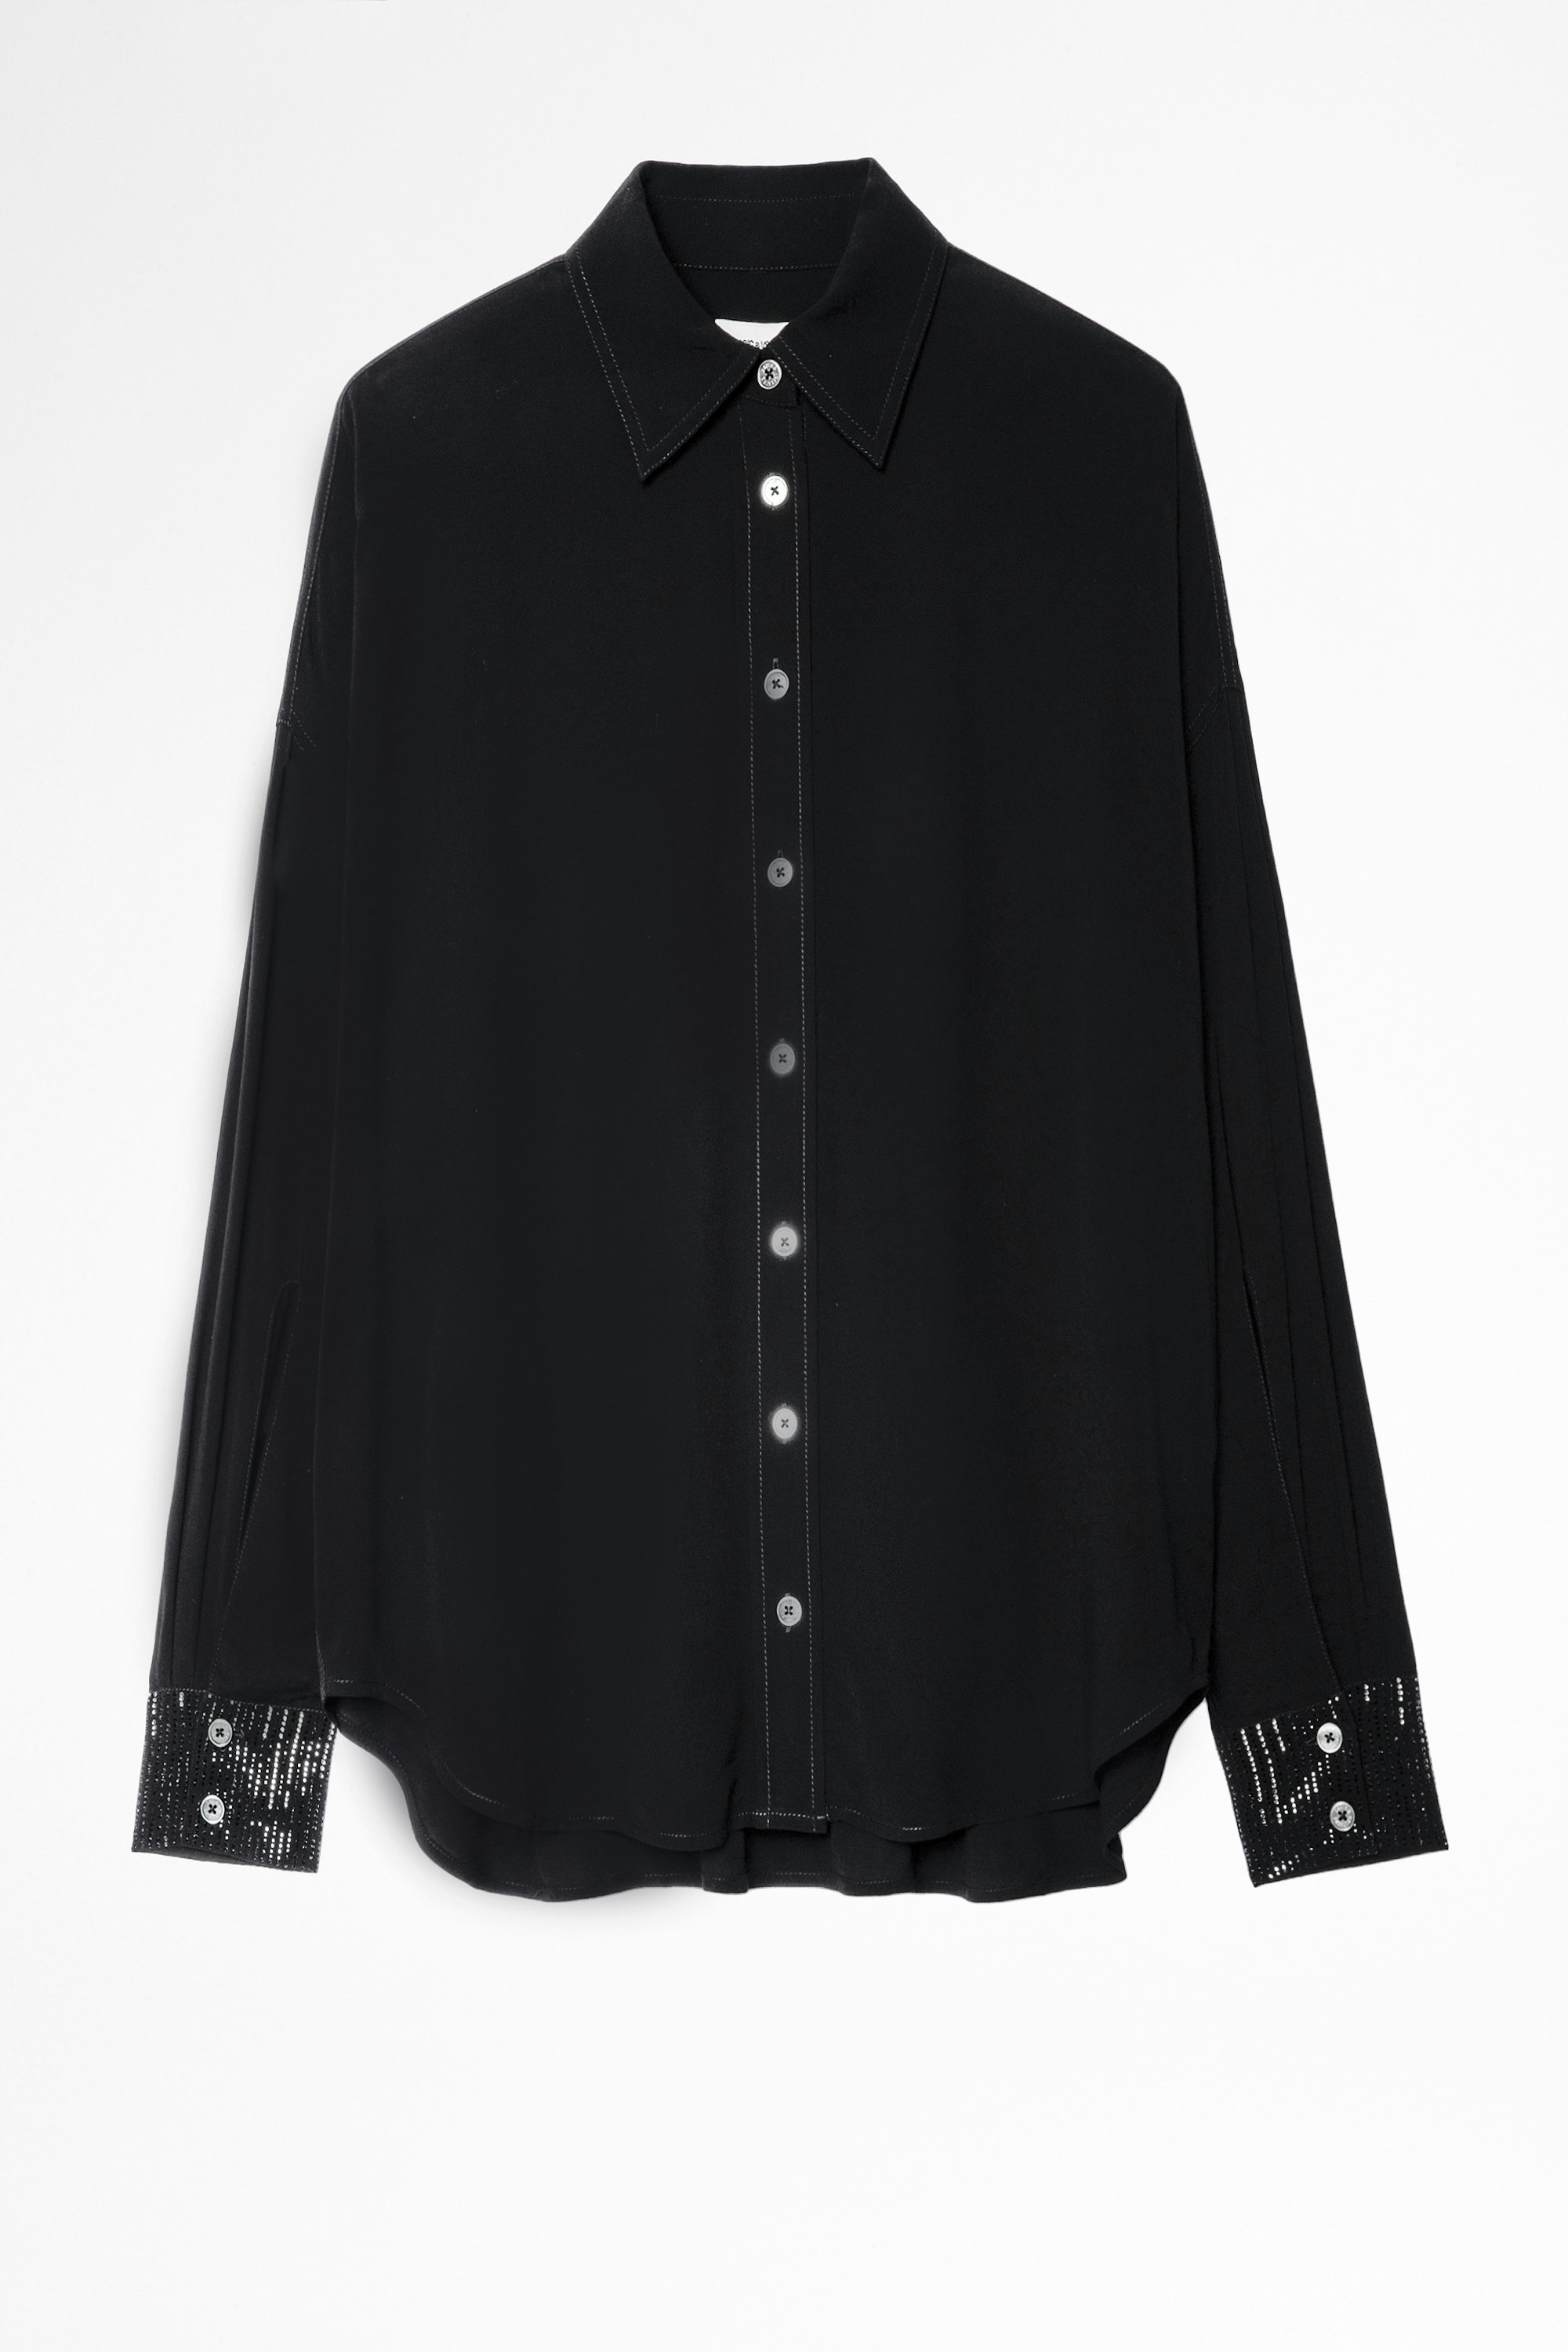 Tamara Rhinestone Shirt Women's shirt in black with rhinestone cuffs. Made with fibers from sustainably managed forests.